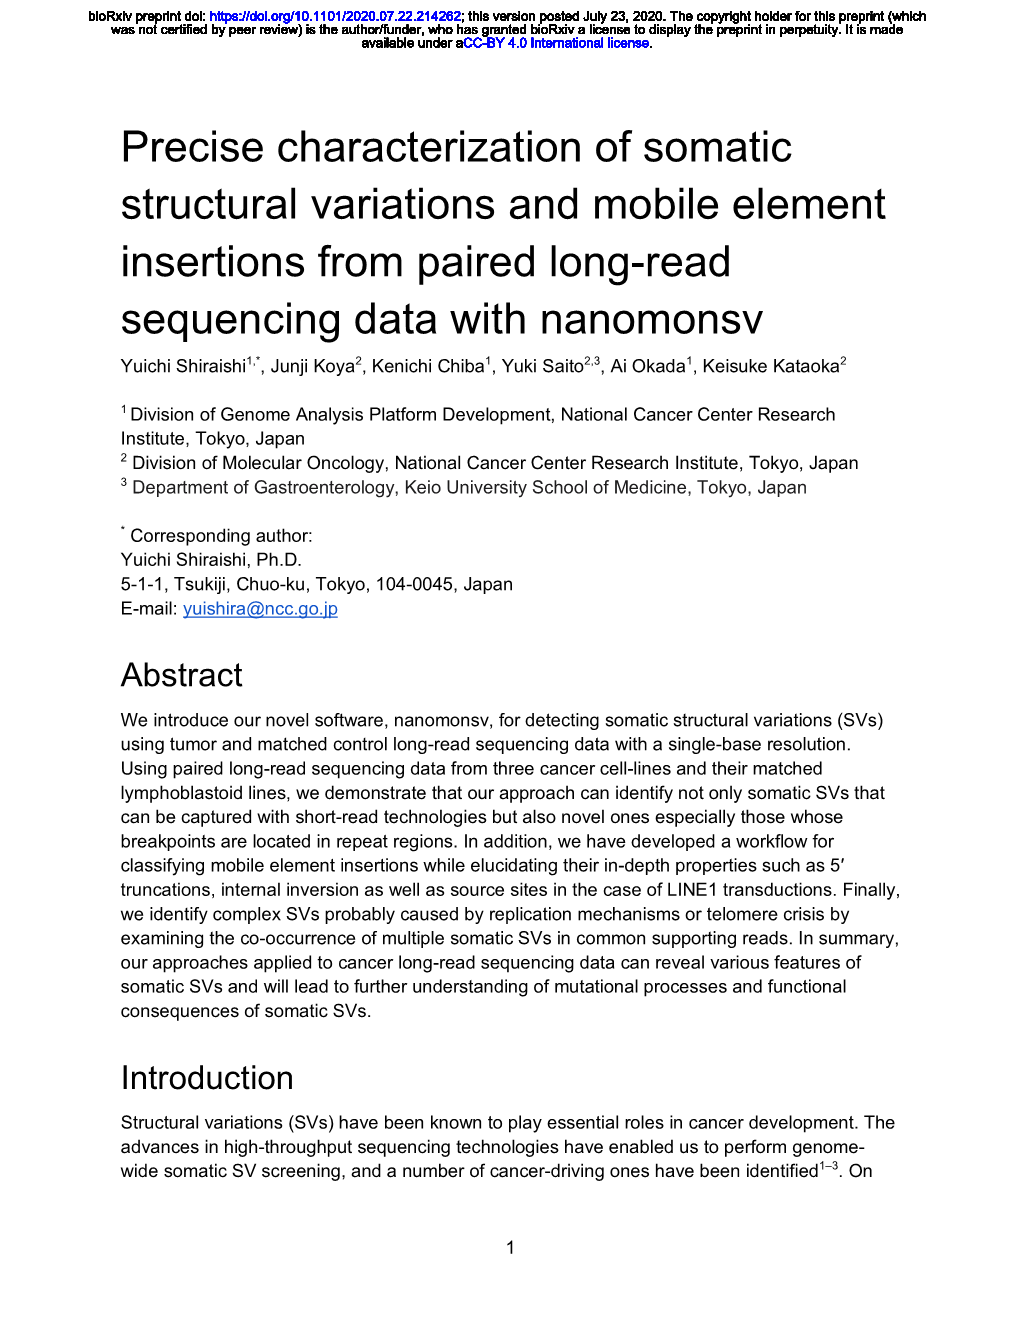 Precise Characterization of Somatic Structural Variations and Mobile